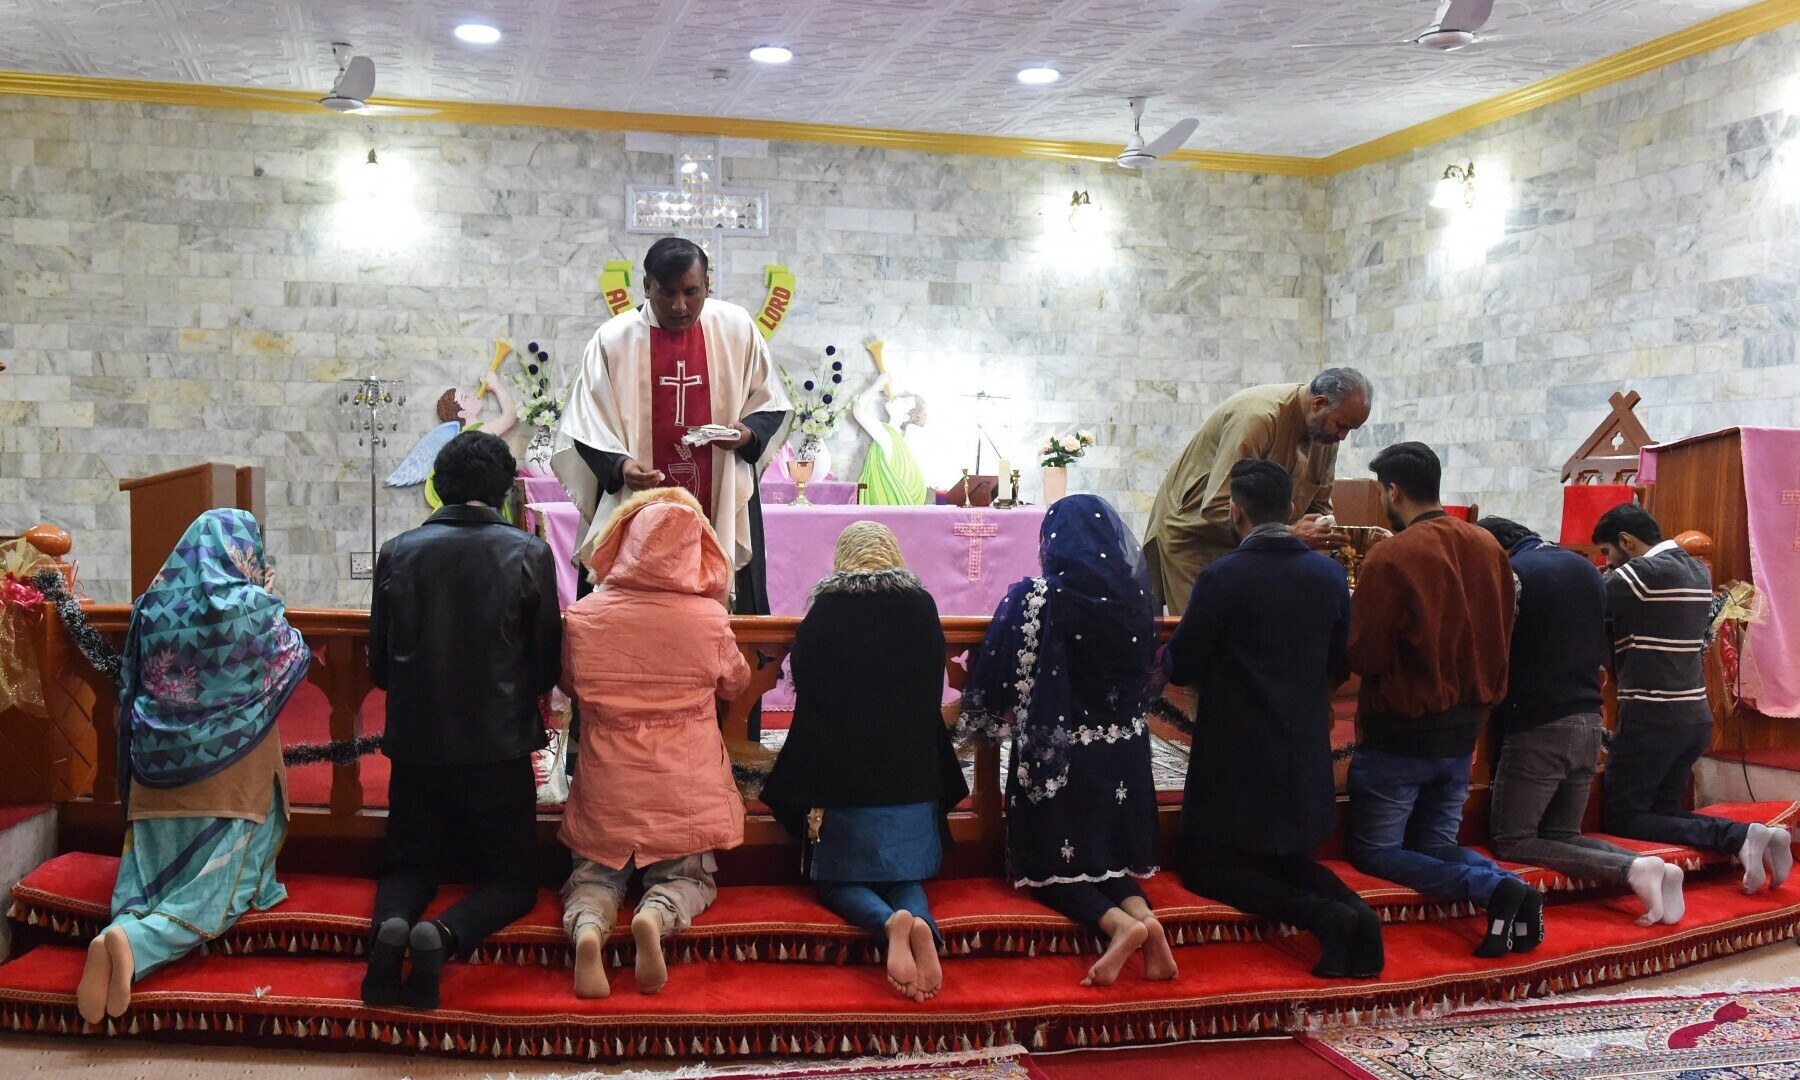 Christian devotees take part in a Christmas prayer at the Bethel Memorial Methodist Church in Quetta on December 25, 2022. — AFP